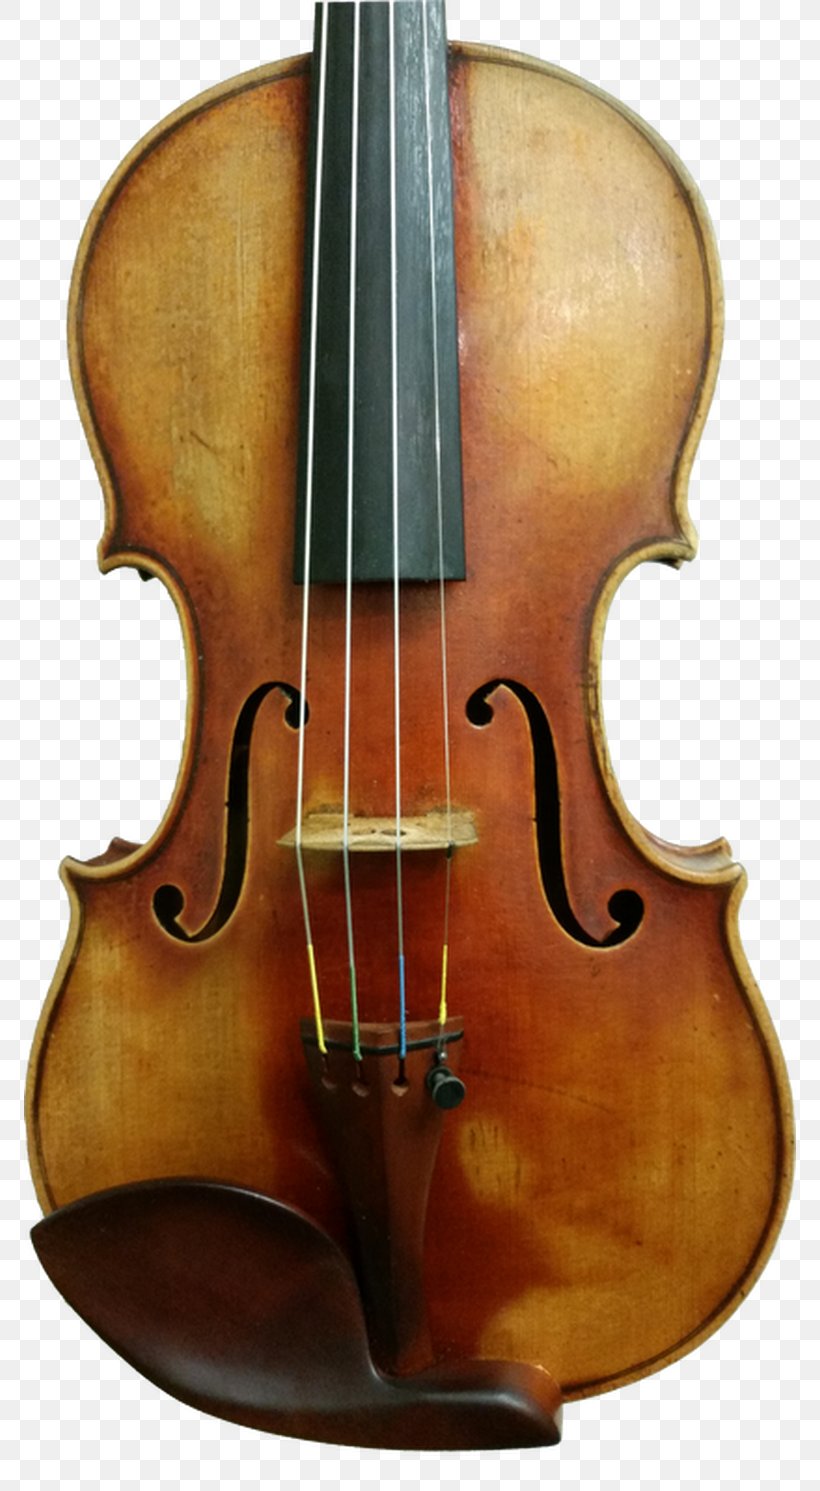 Bass Violin Violone Bowed String Instrument Cello, PNG, 772x1491px, Bass Violin, Acoustic Electric Guitar, Bow, Bowed String Instrument, Cello Download Free